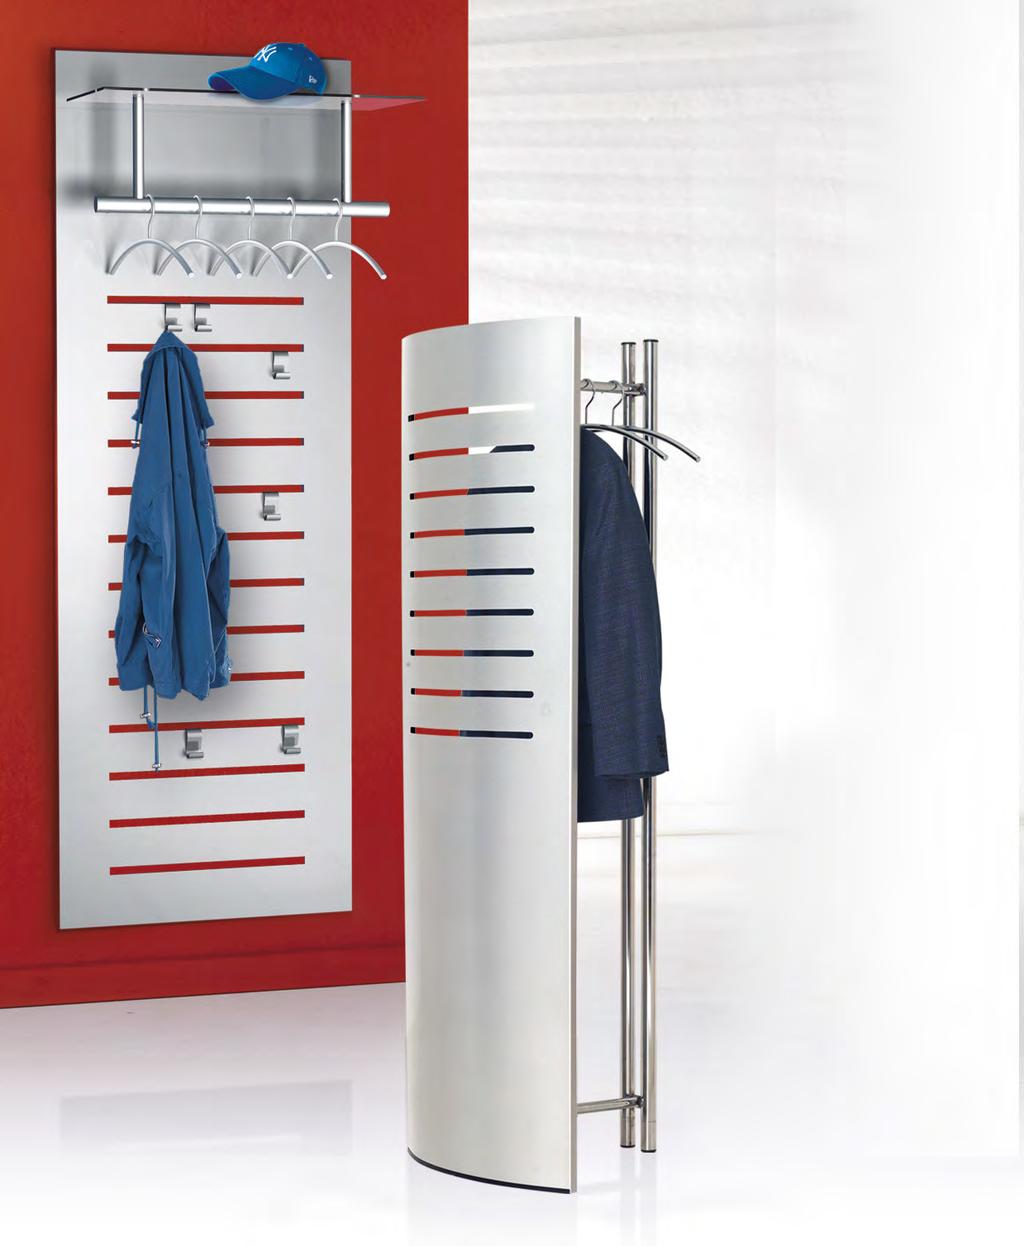 Designer coat stands 0 4 79, 0 0 0 309, NEW Visually conceals the clothing 339, 3 69, 6 coat hangers included!